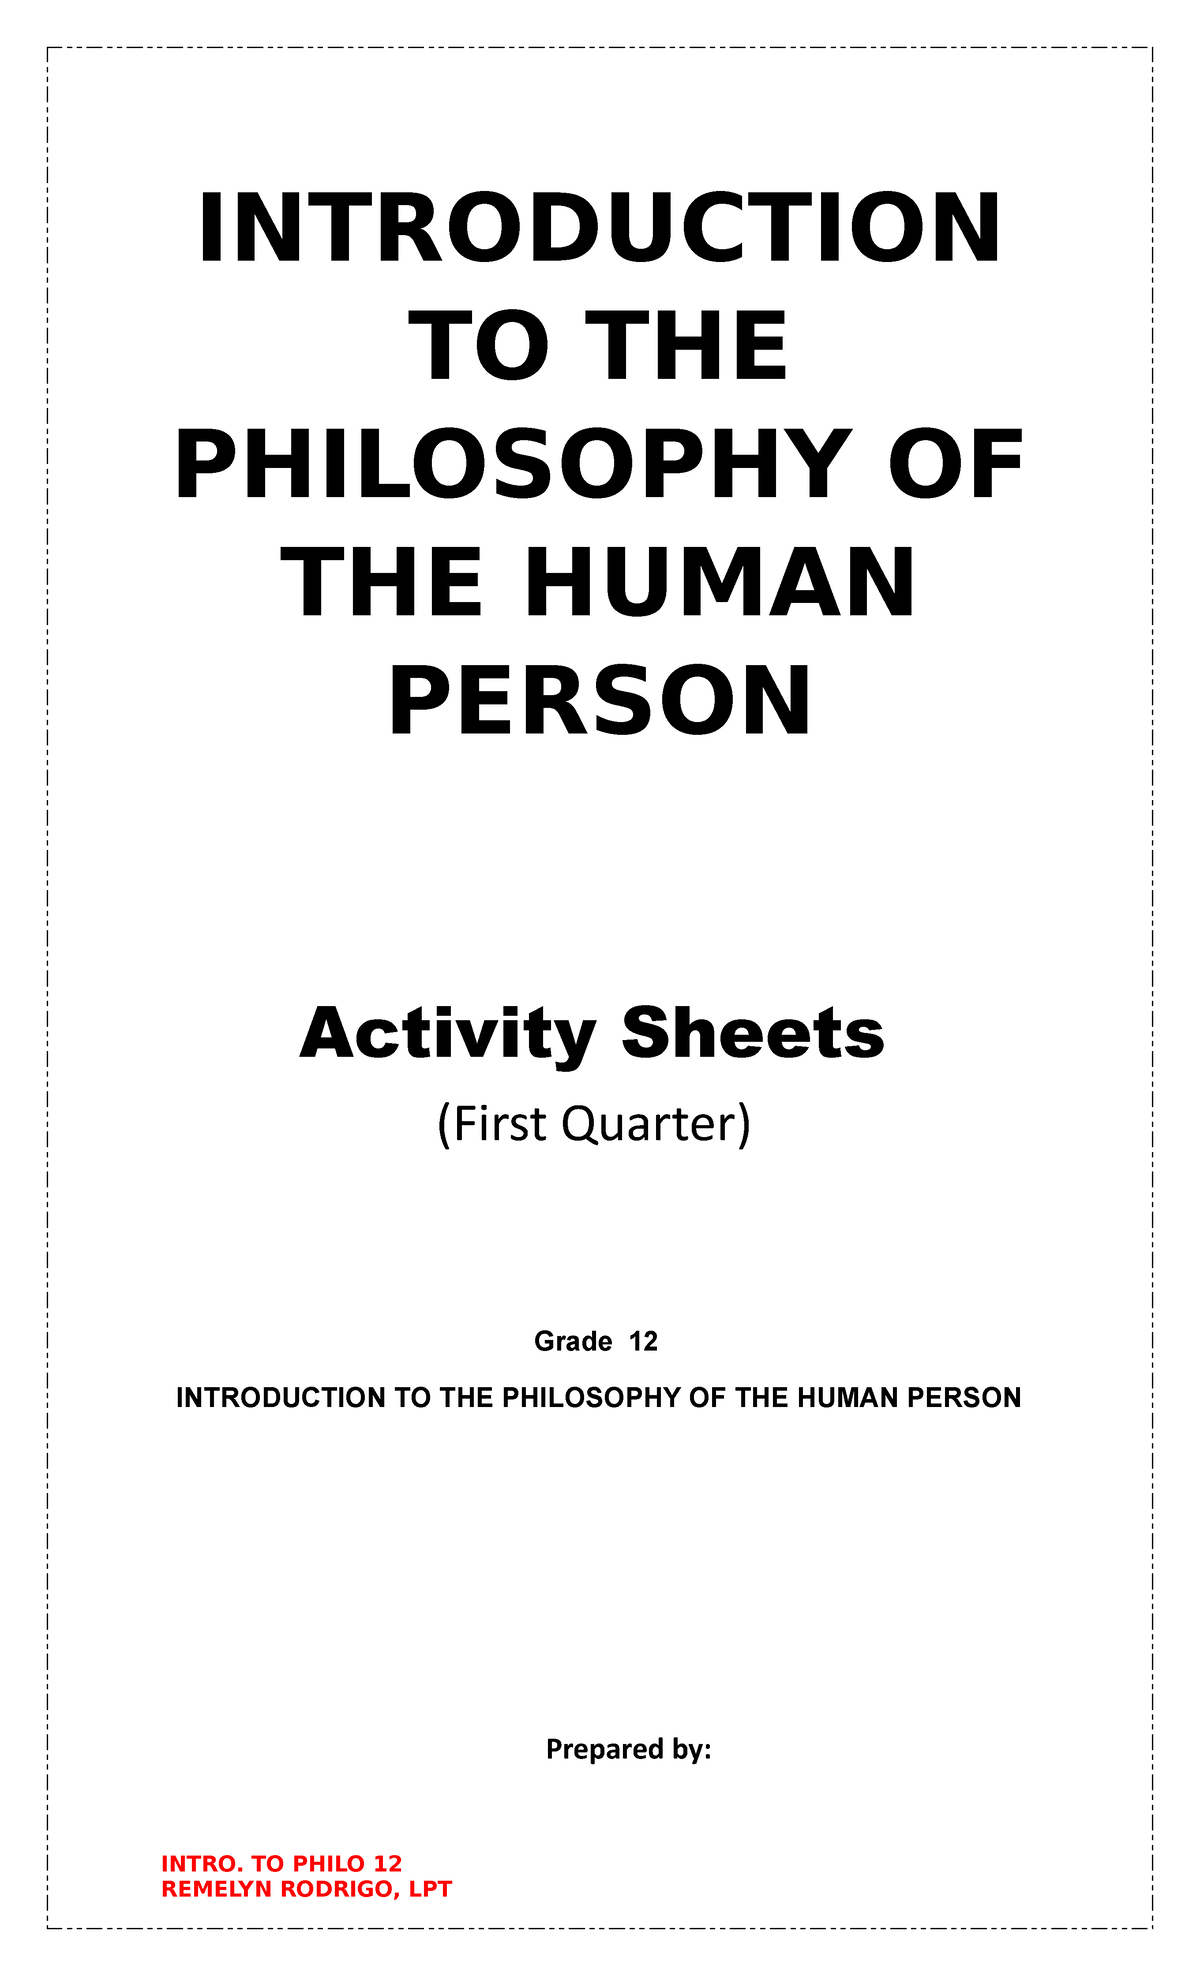 Intro To Philo 12 Activity Sheets Introduction To The Philosophy Of The Human Person Activity 5754